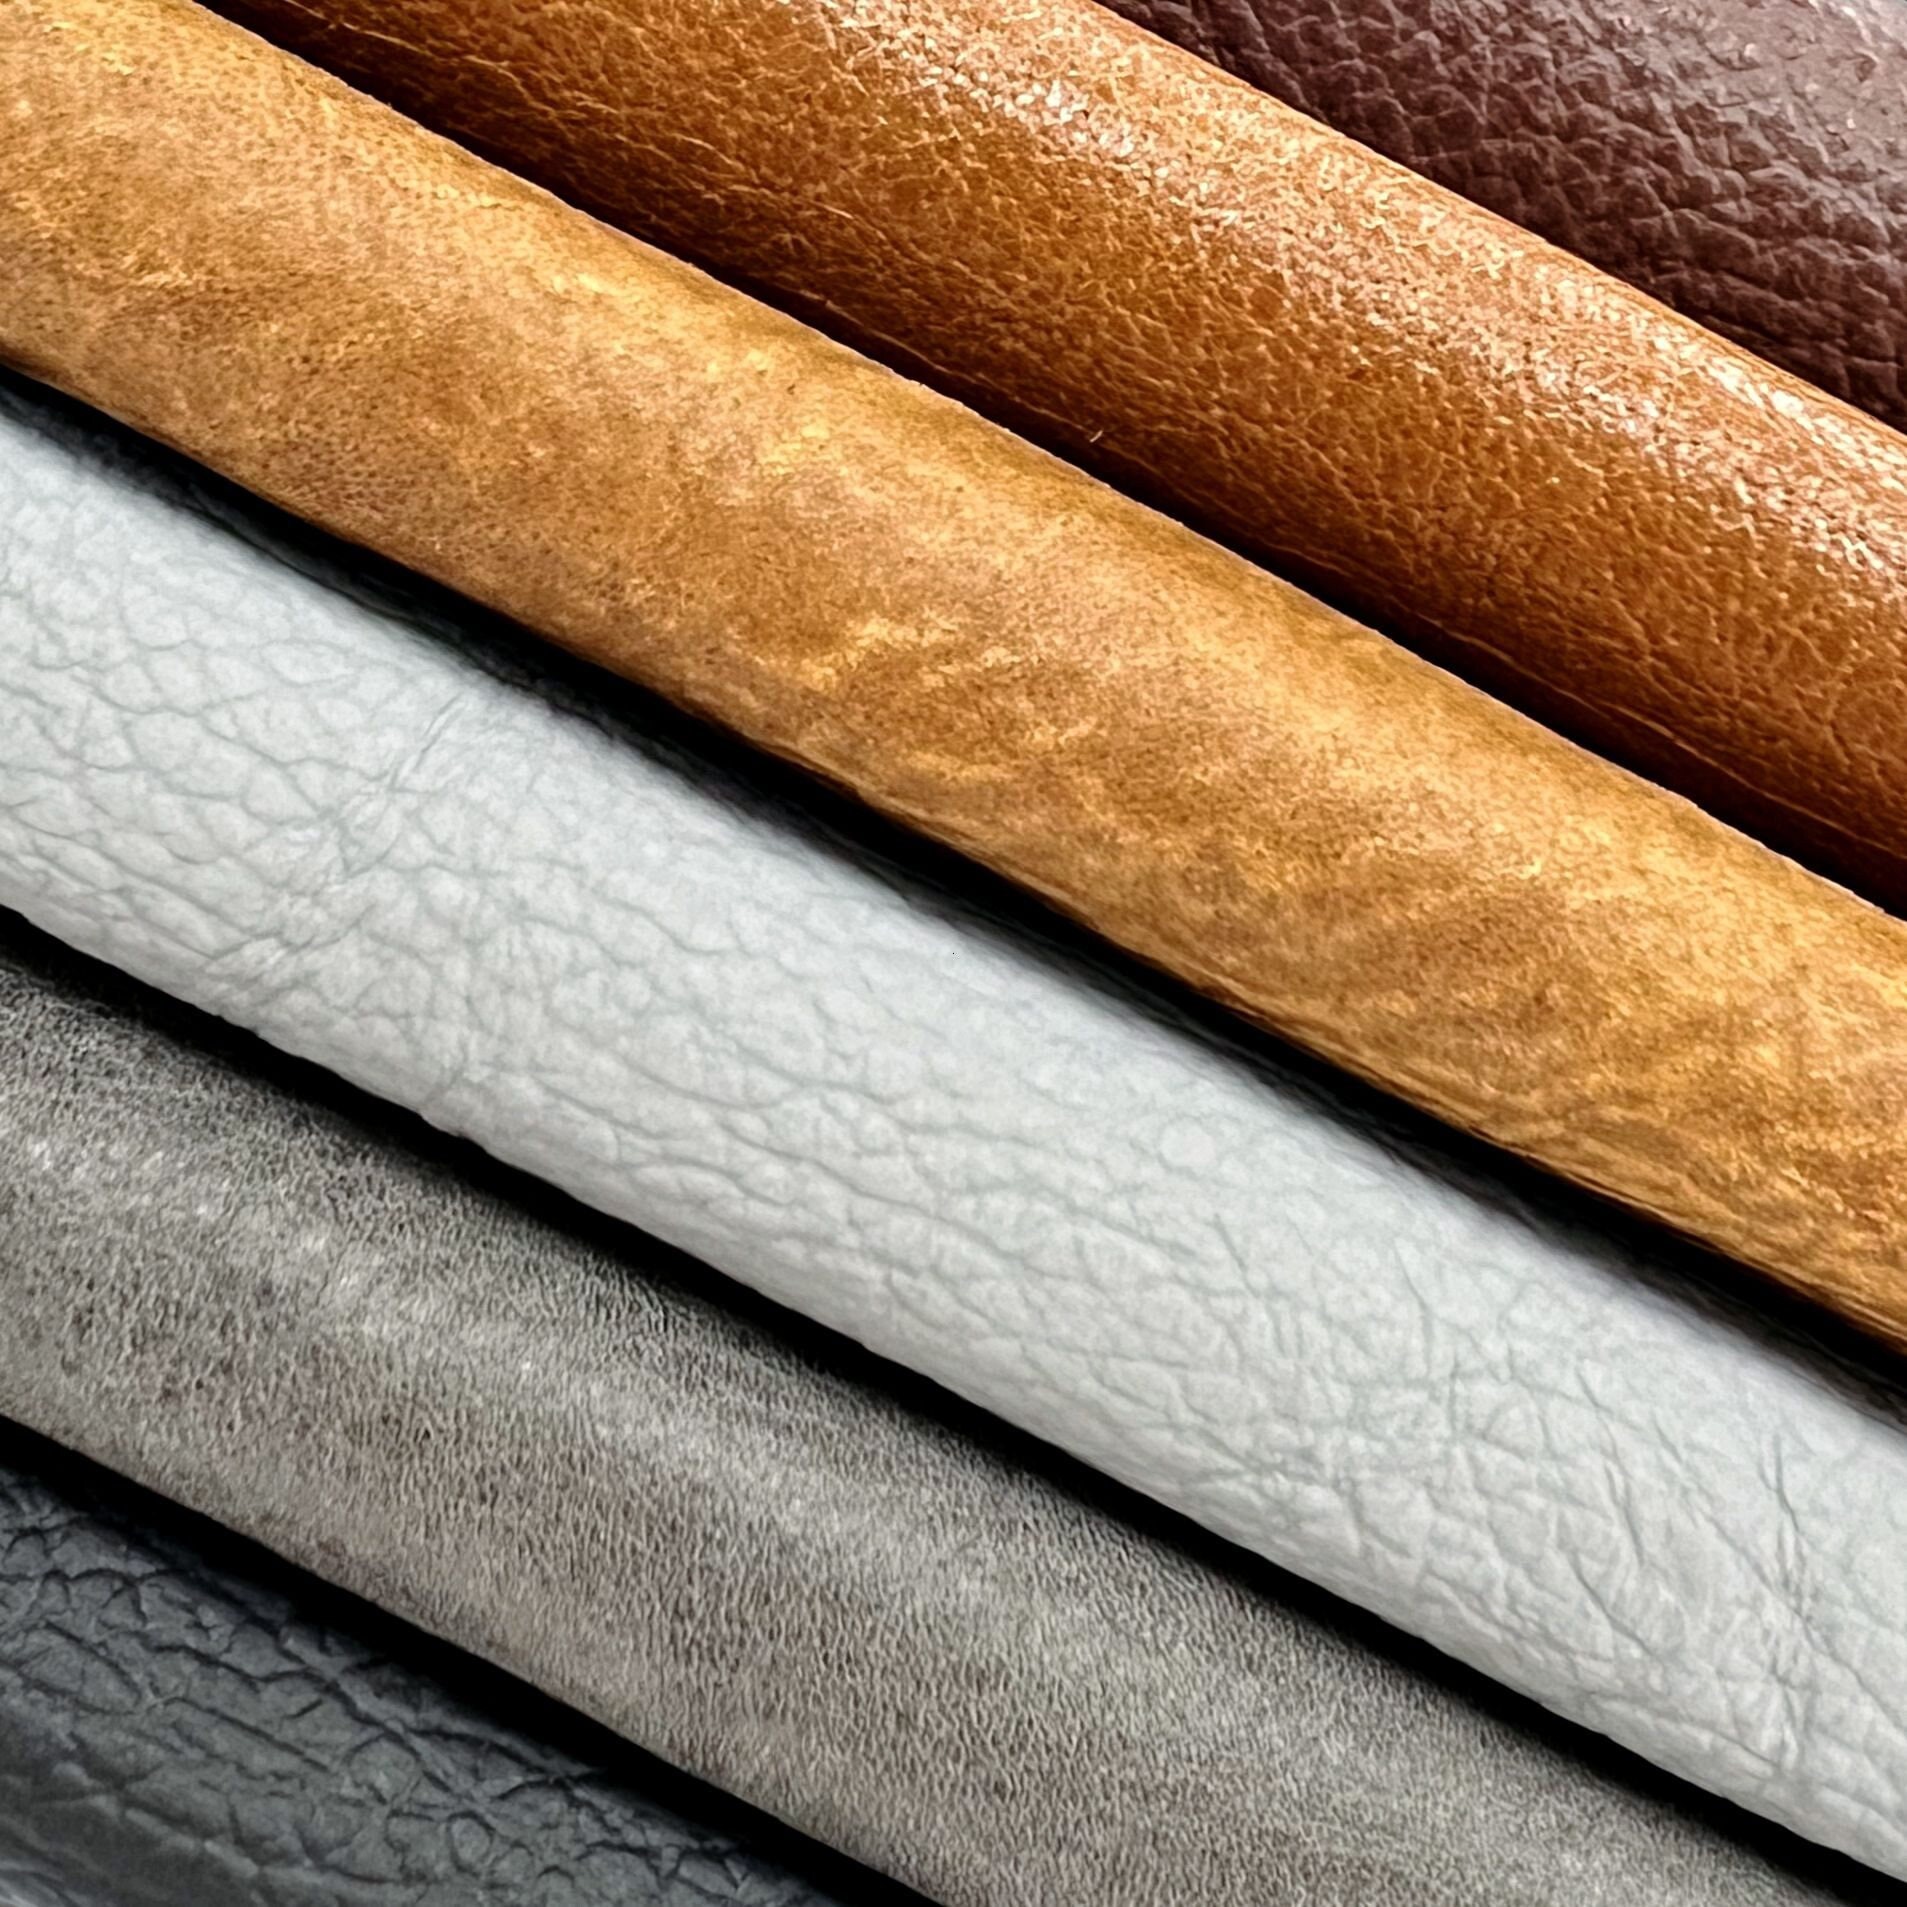 Genuine Leather Material Pieces 8x8 Perfect for Arts and Crafts VARIOUS  Colors Available Trusted UK Supplier 